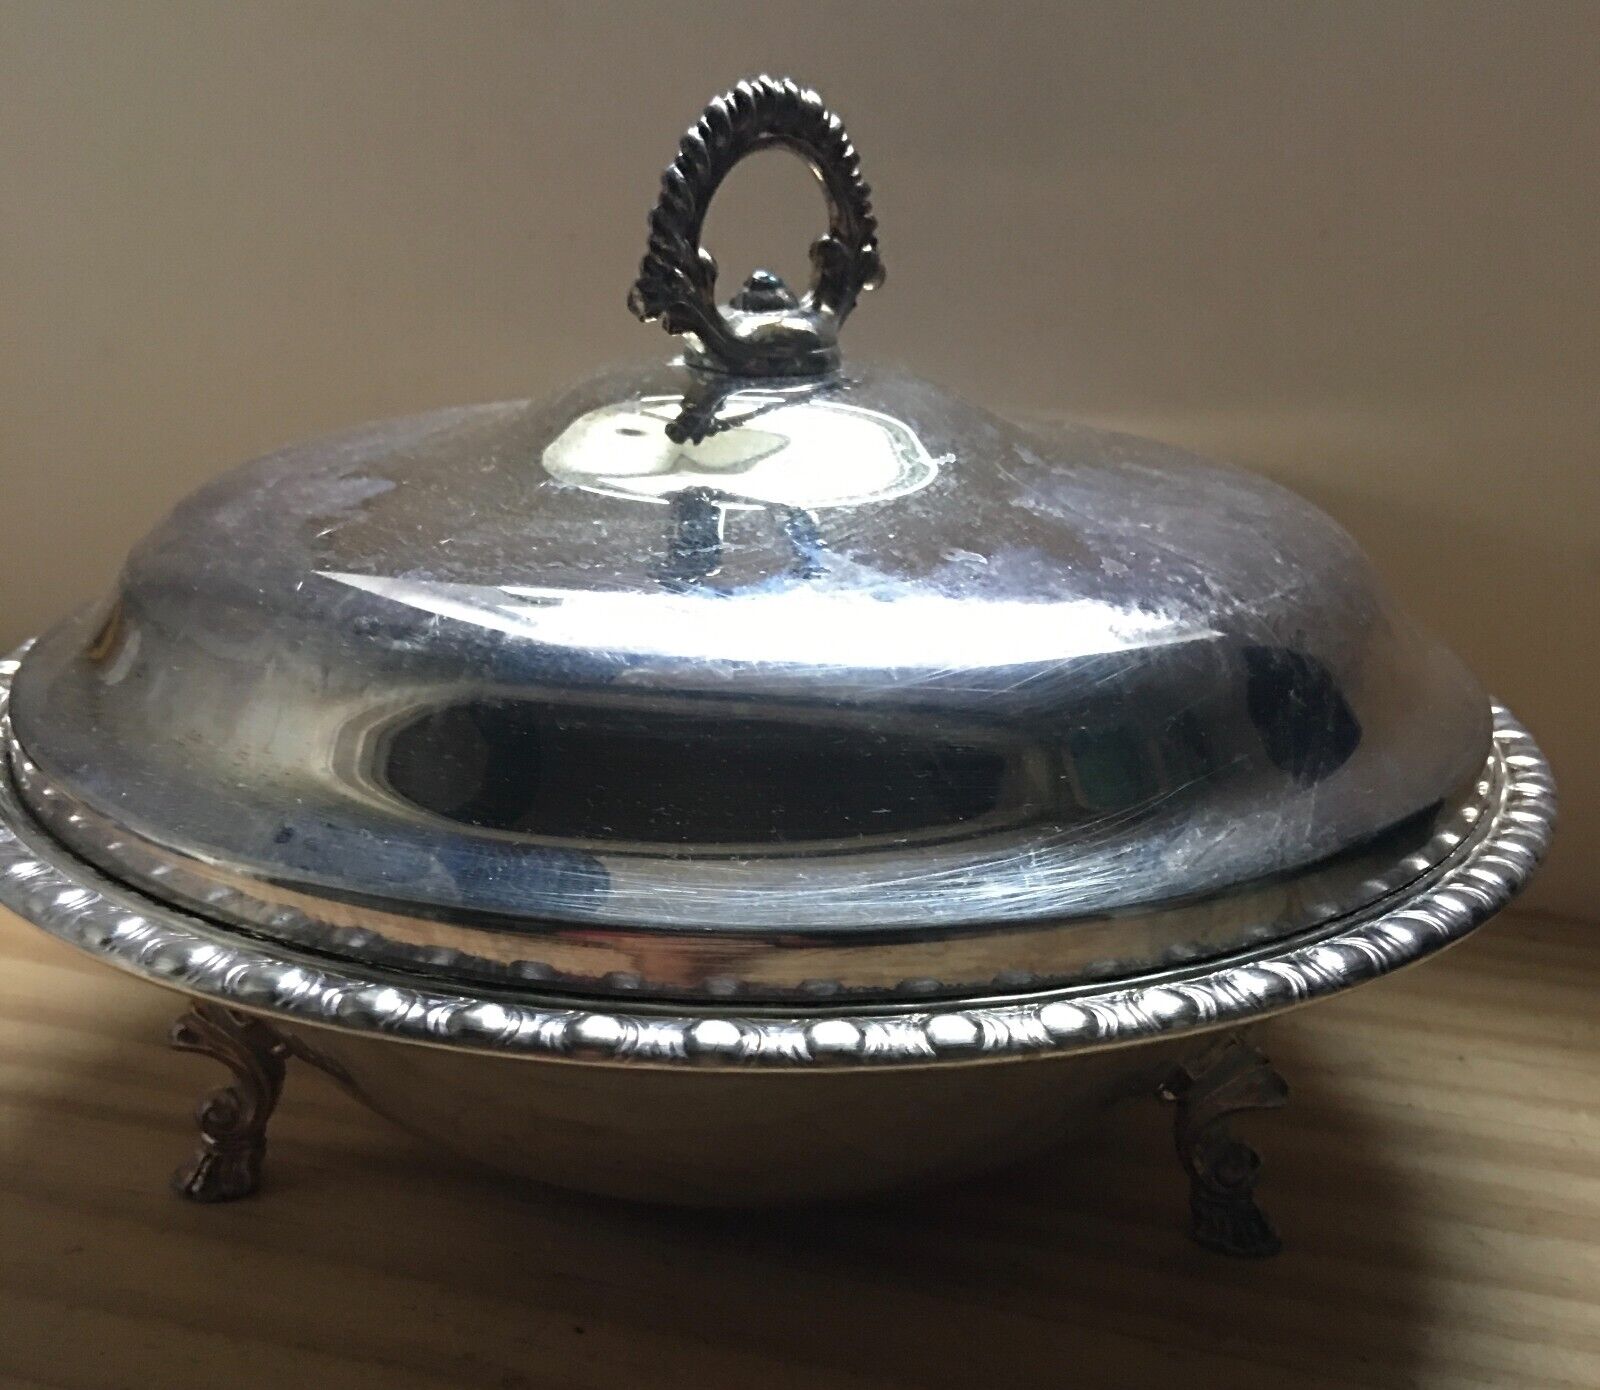 VTG 1970s Rodgers Bro Silver Plated footed Casserole Serving bowl / Dish w/ lid